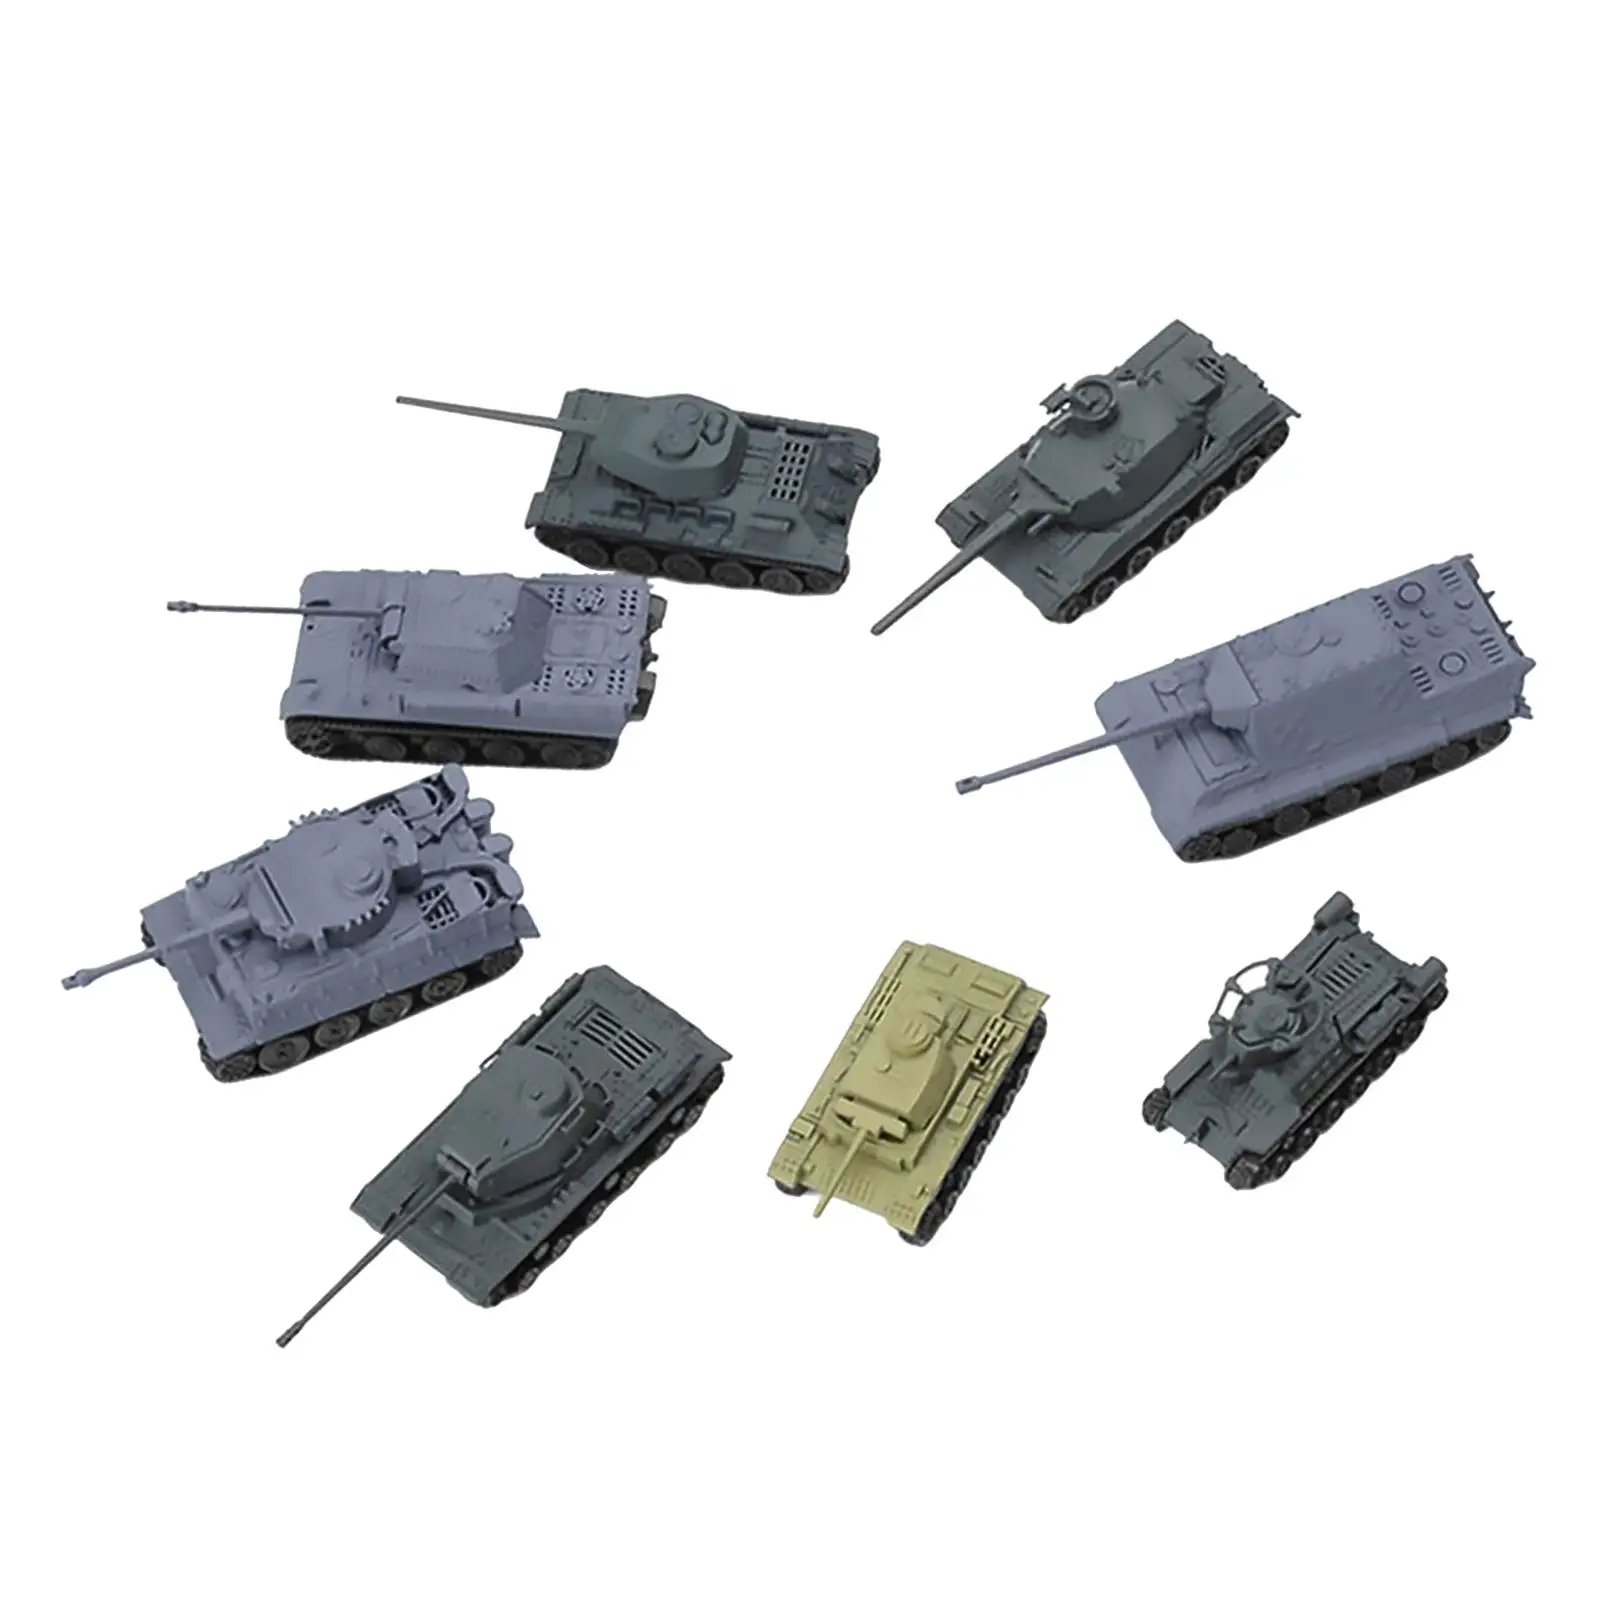 Set of 8 1:144 Assemble Tank Kits  Hobby Building for Tabletop